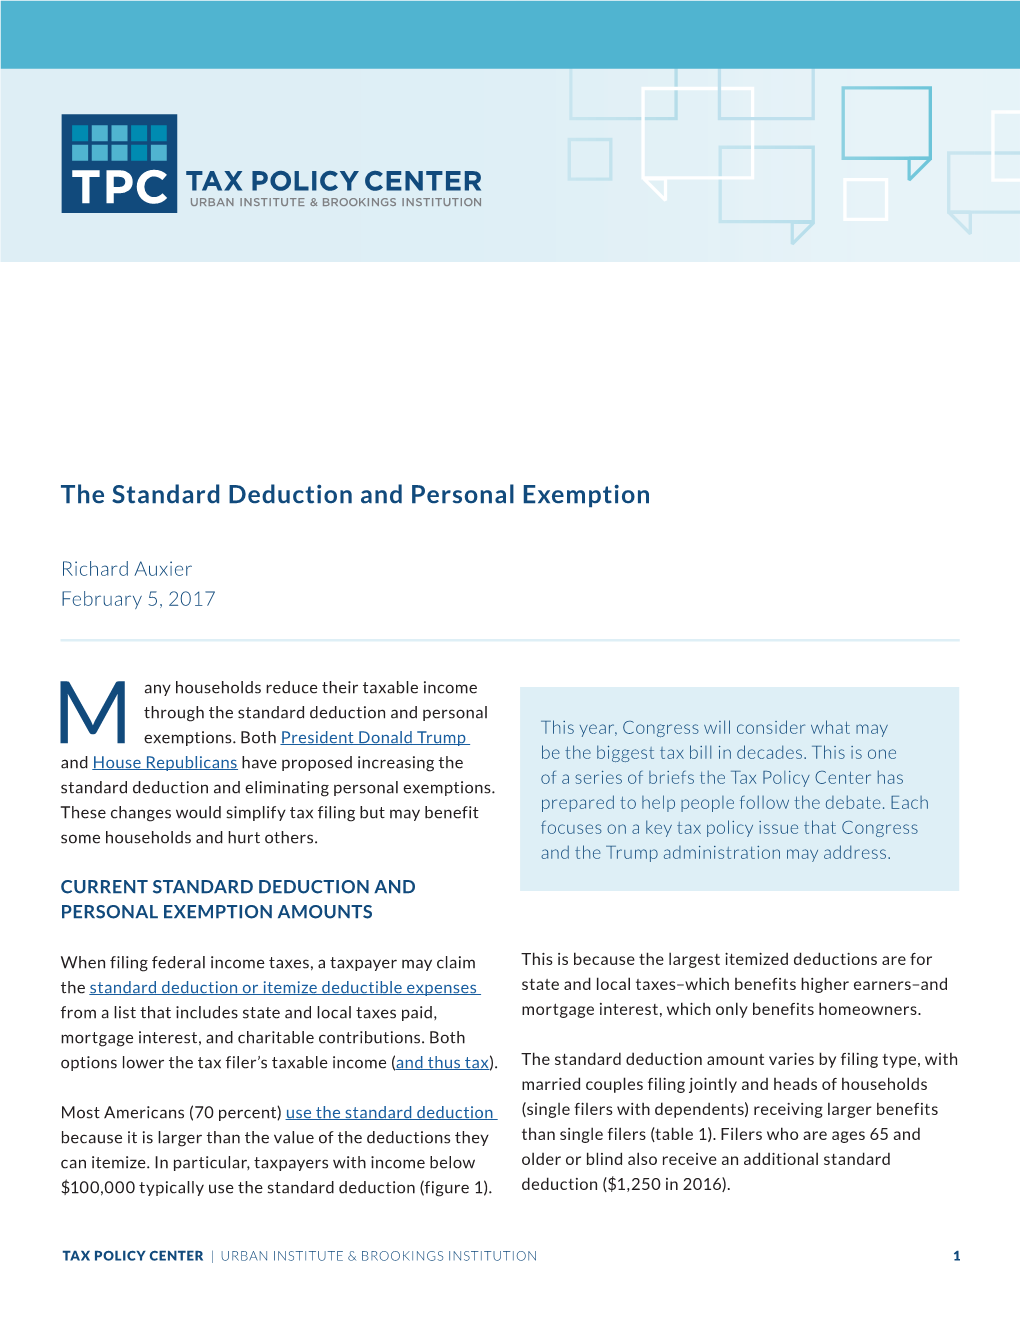 The Standard Deduction and Personal Exemption